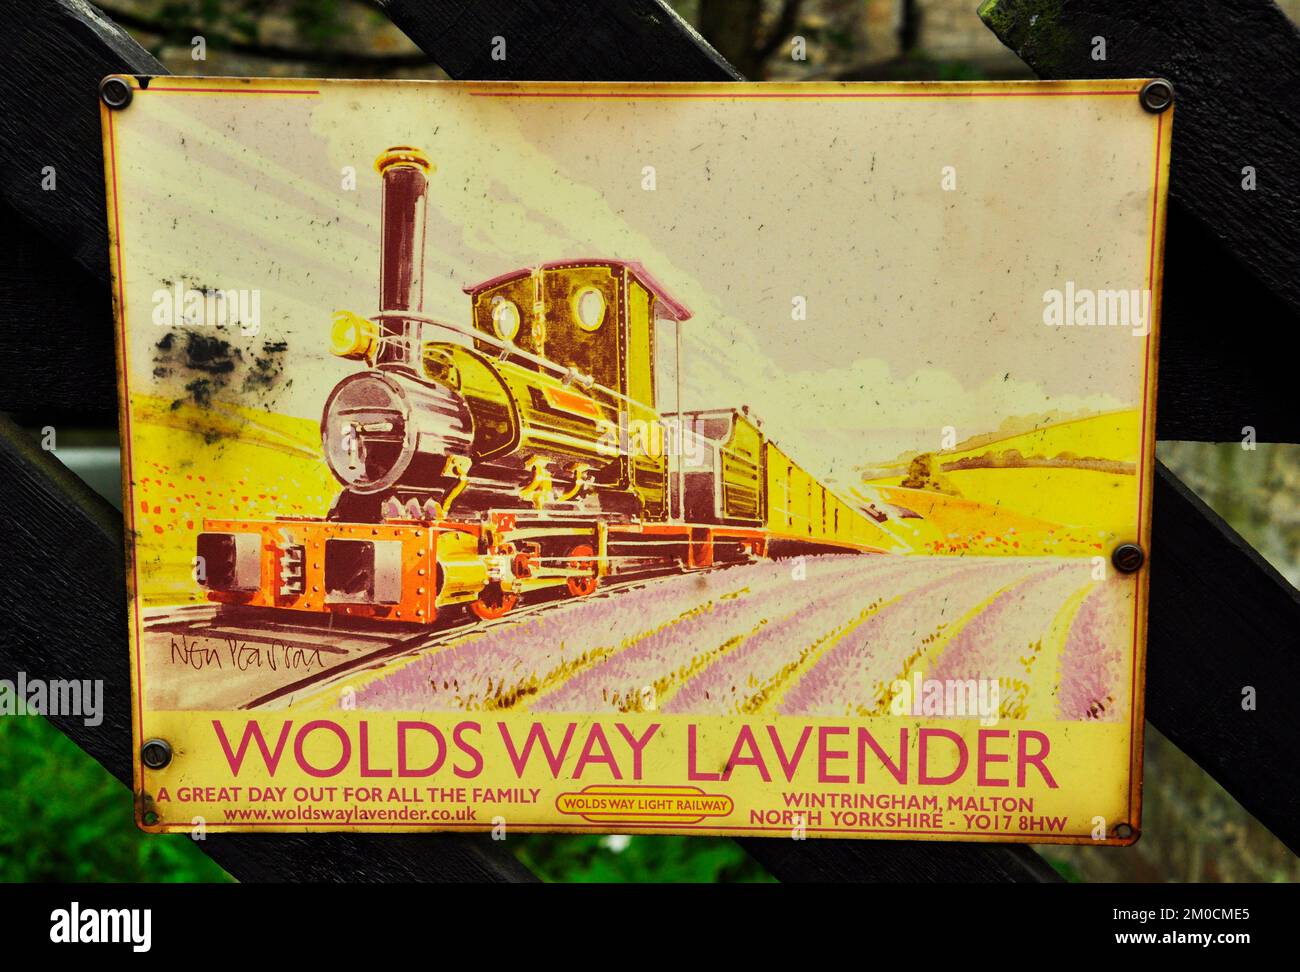 Enamelled metal sign, advertising Woldsway Lavender light railway photographed at Pickering station on the North York Moors railway in Yorkshire,Engla Stock Photo